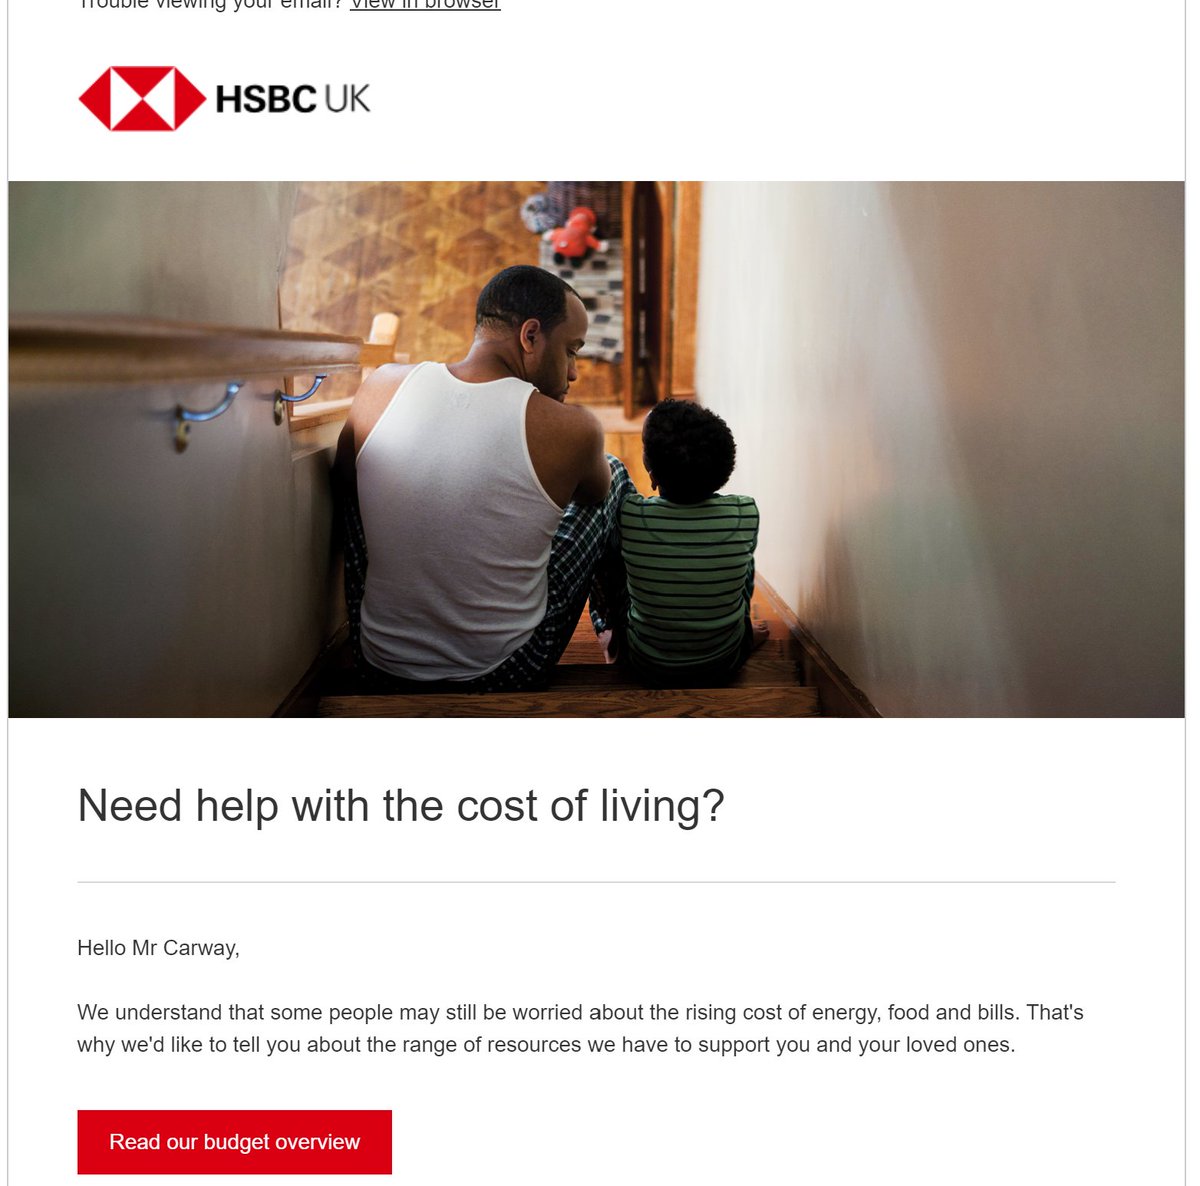 Yeah @hsbcuk, how about not stealing money from your own pensioners, for a start. @MidlandClawbac1